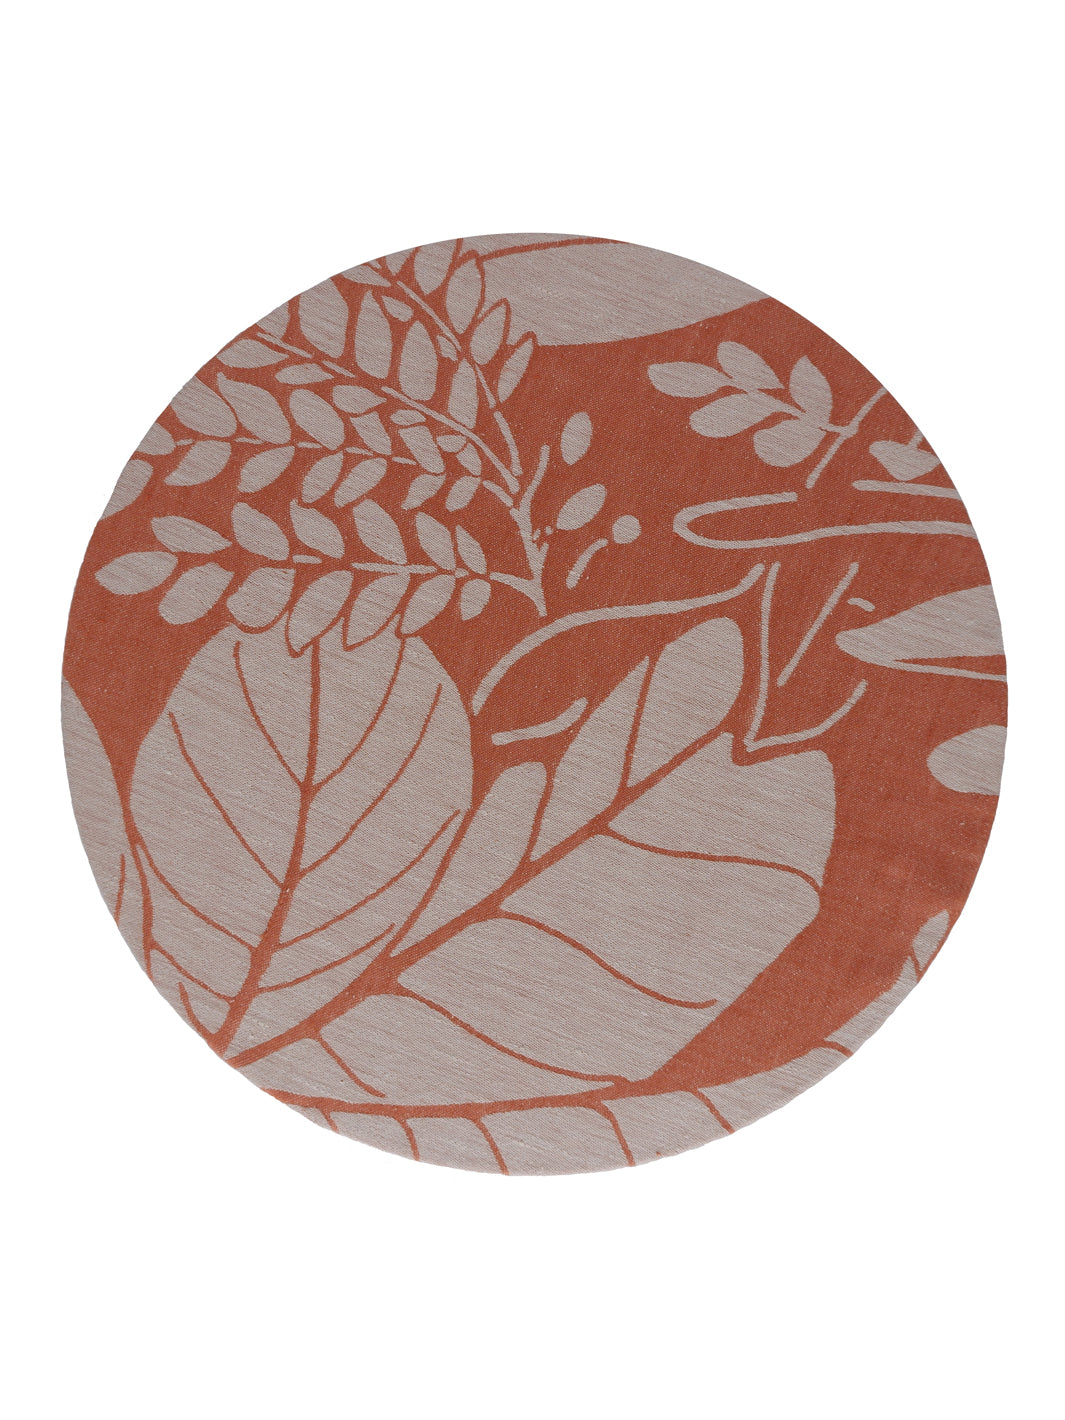 Moye Linen Damask Tutti Le Foglie Charger Plate - Buy one Get One 50% Off